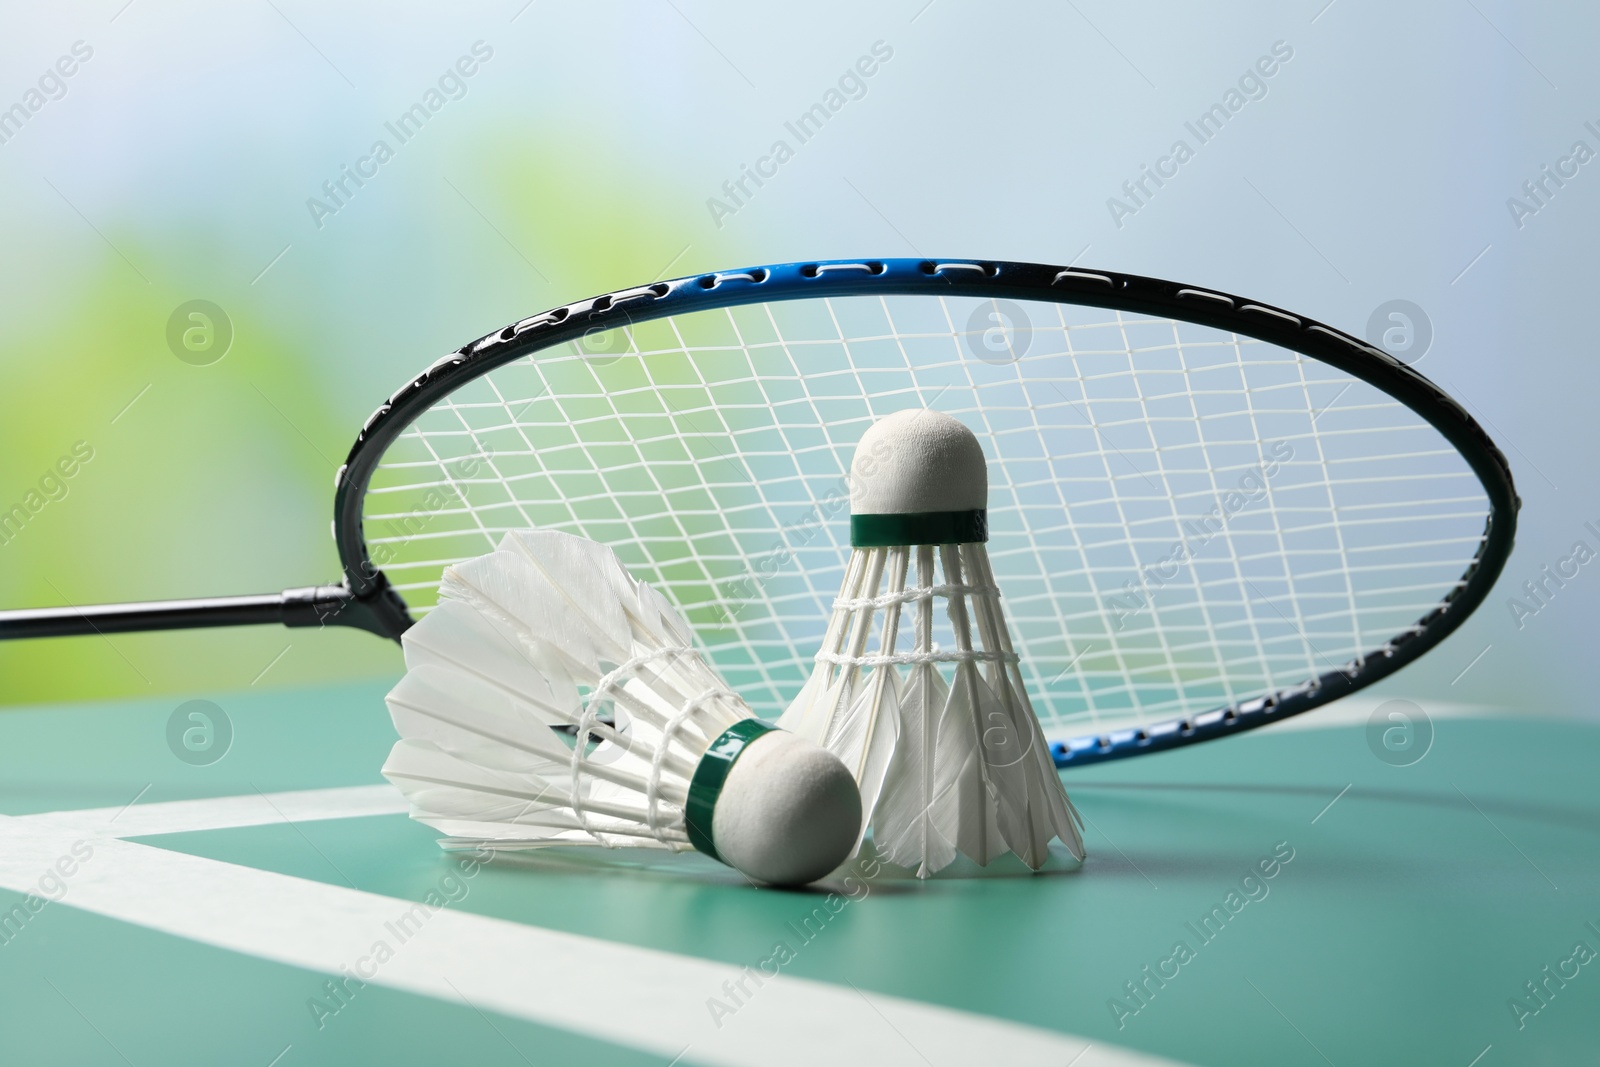 Photo of Feather badminton shuttlecocks and racket on green table against blurred background, closeup